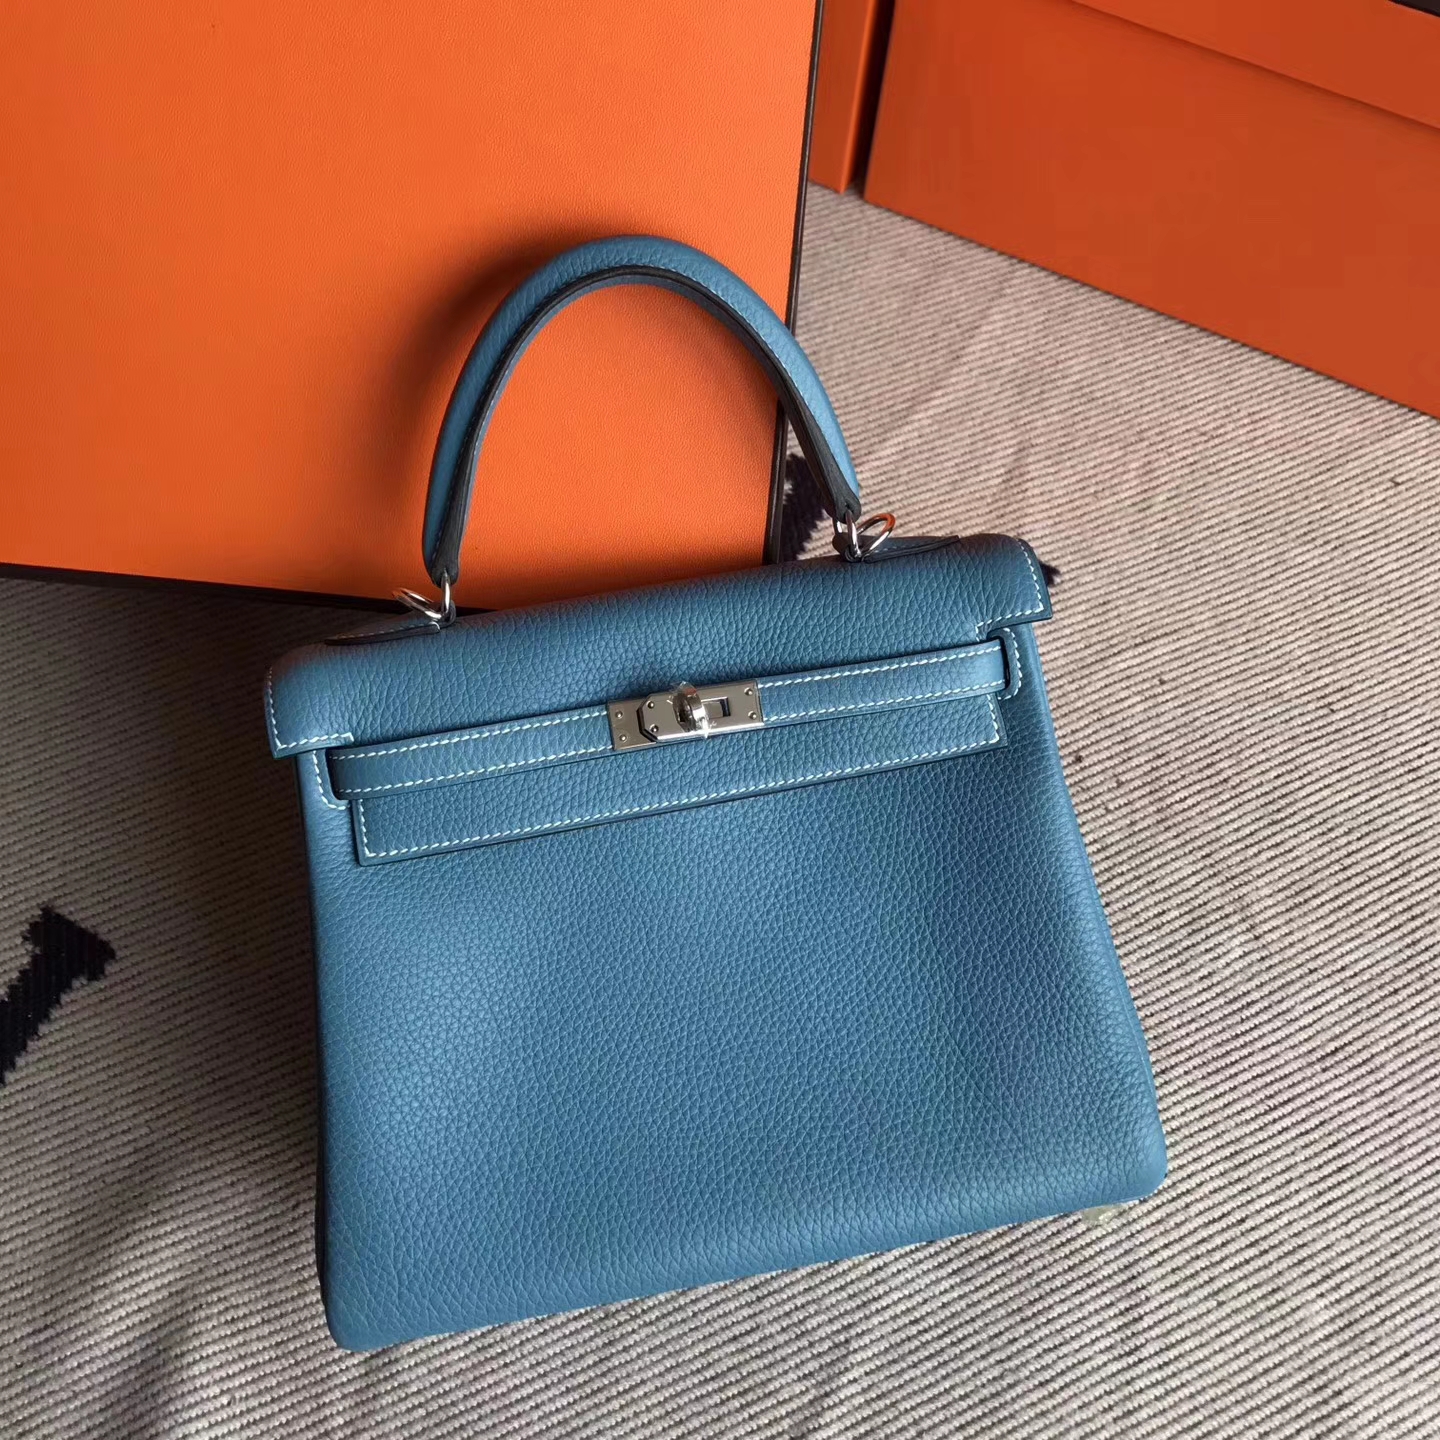 Discount Hermes Kelly Bag25cm in Blue Jean Togo Leather Silver Hardware